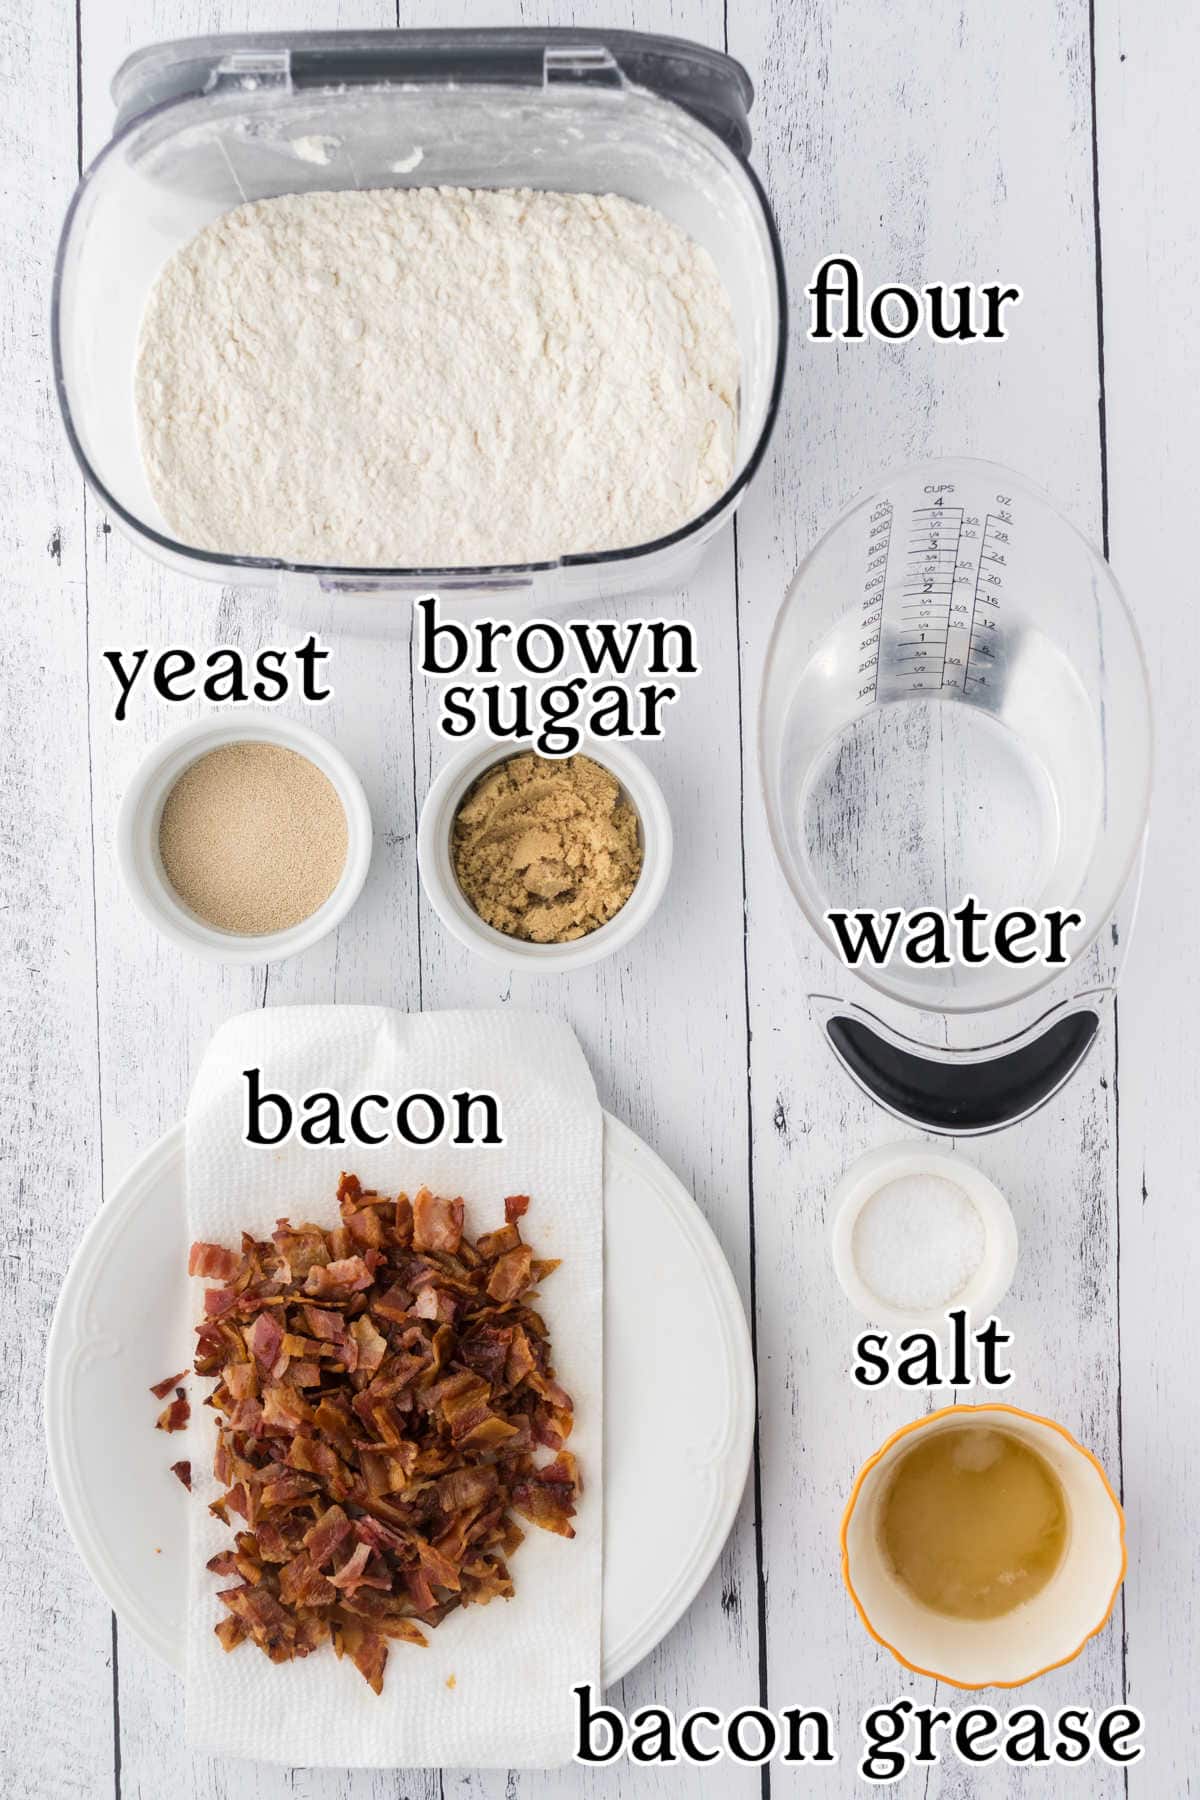 Labeled ingredients for bacon bread.